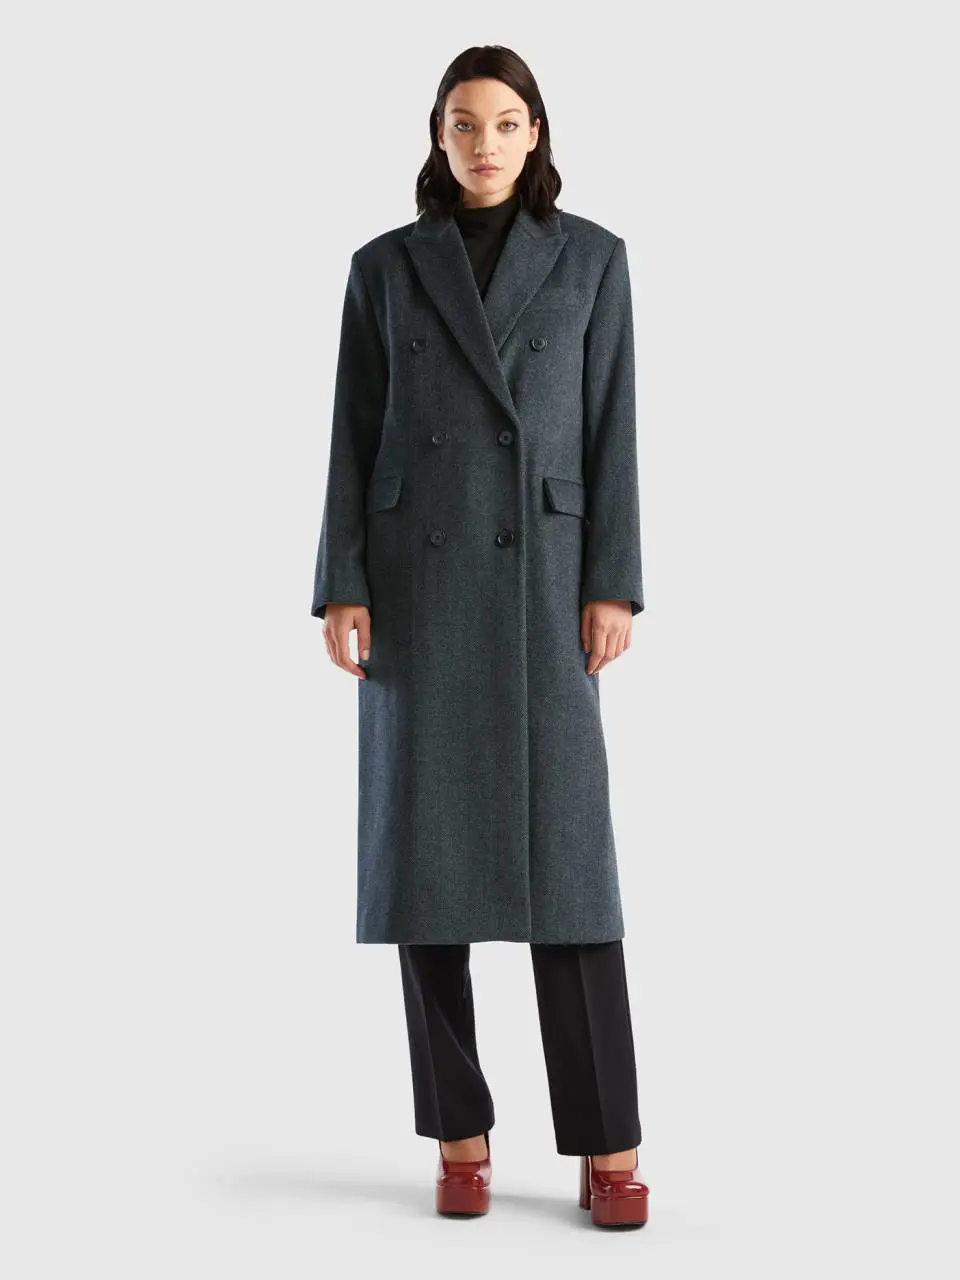 Benetton long double-breasted coat. 1